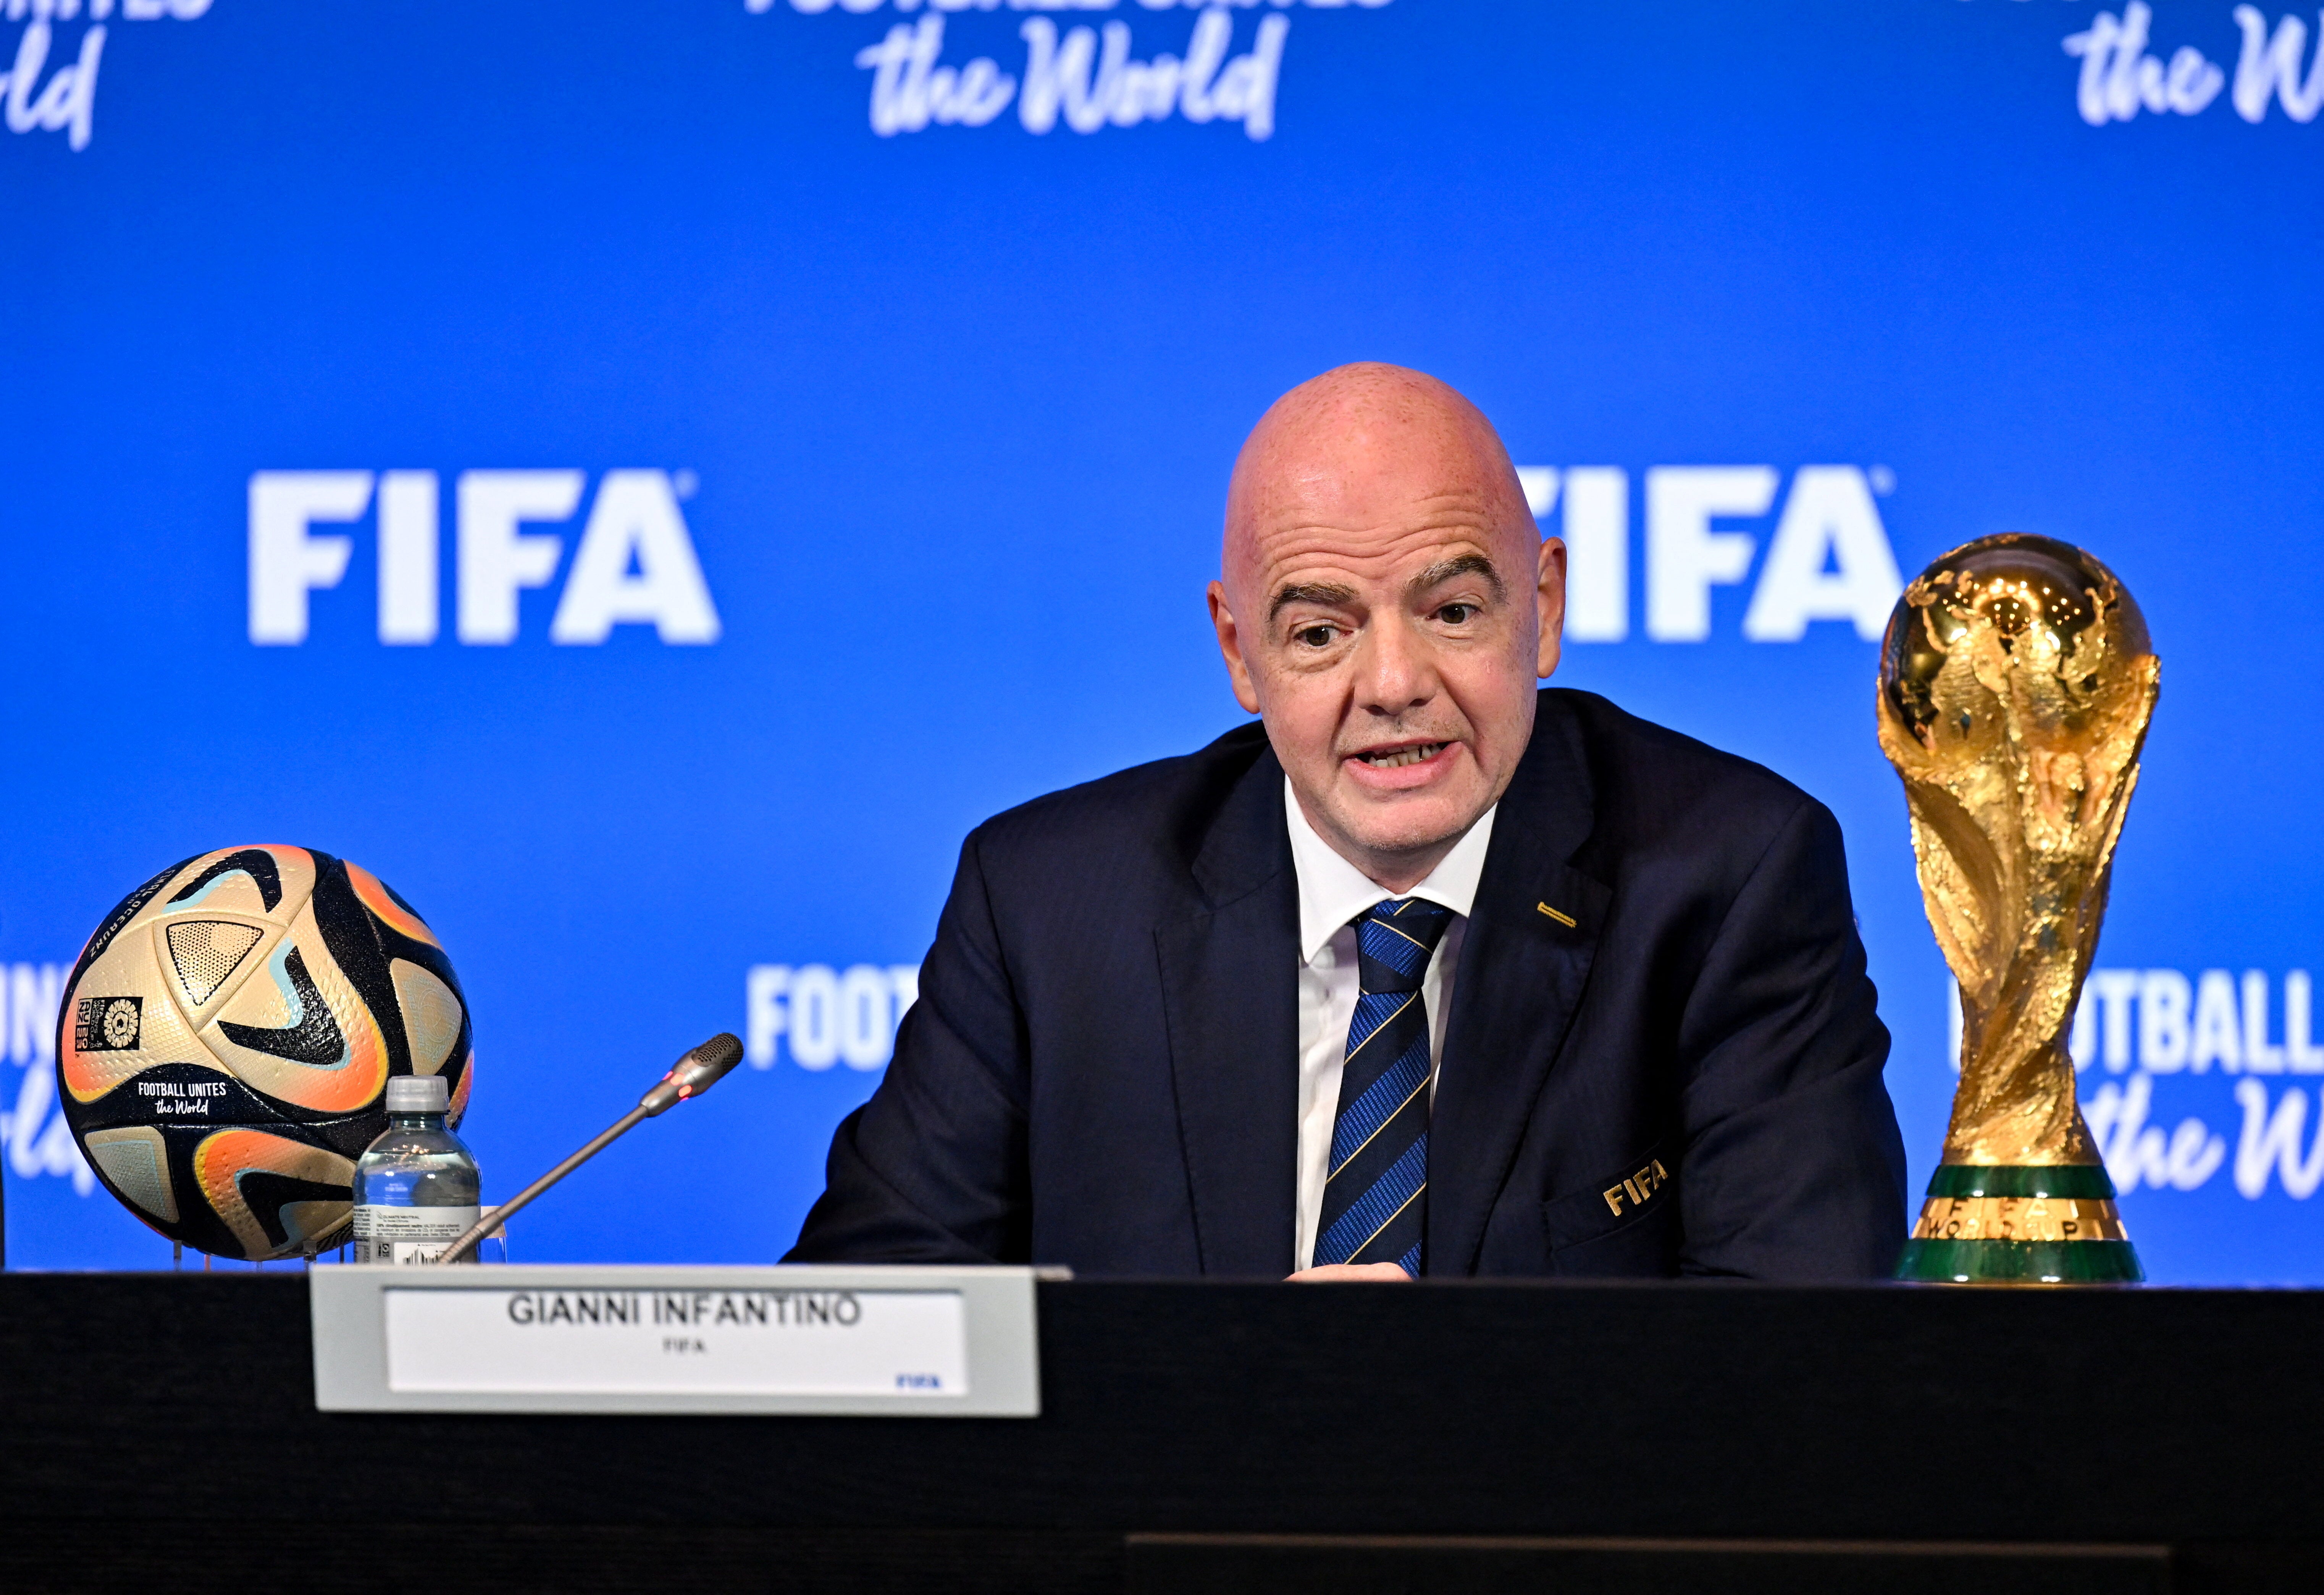 Gianni Infantino addresses a Fifa Council meeting in Zurich